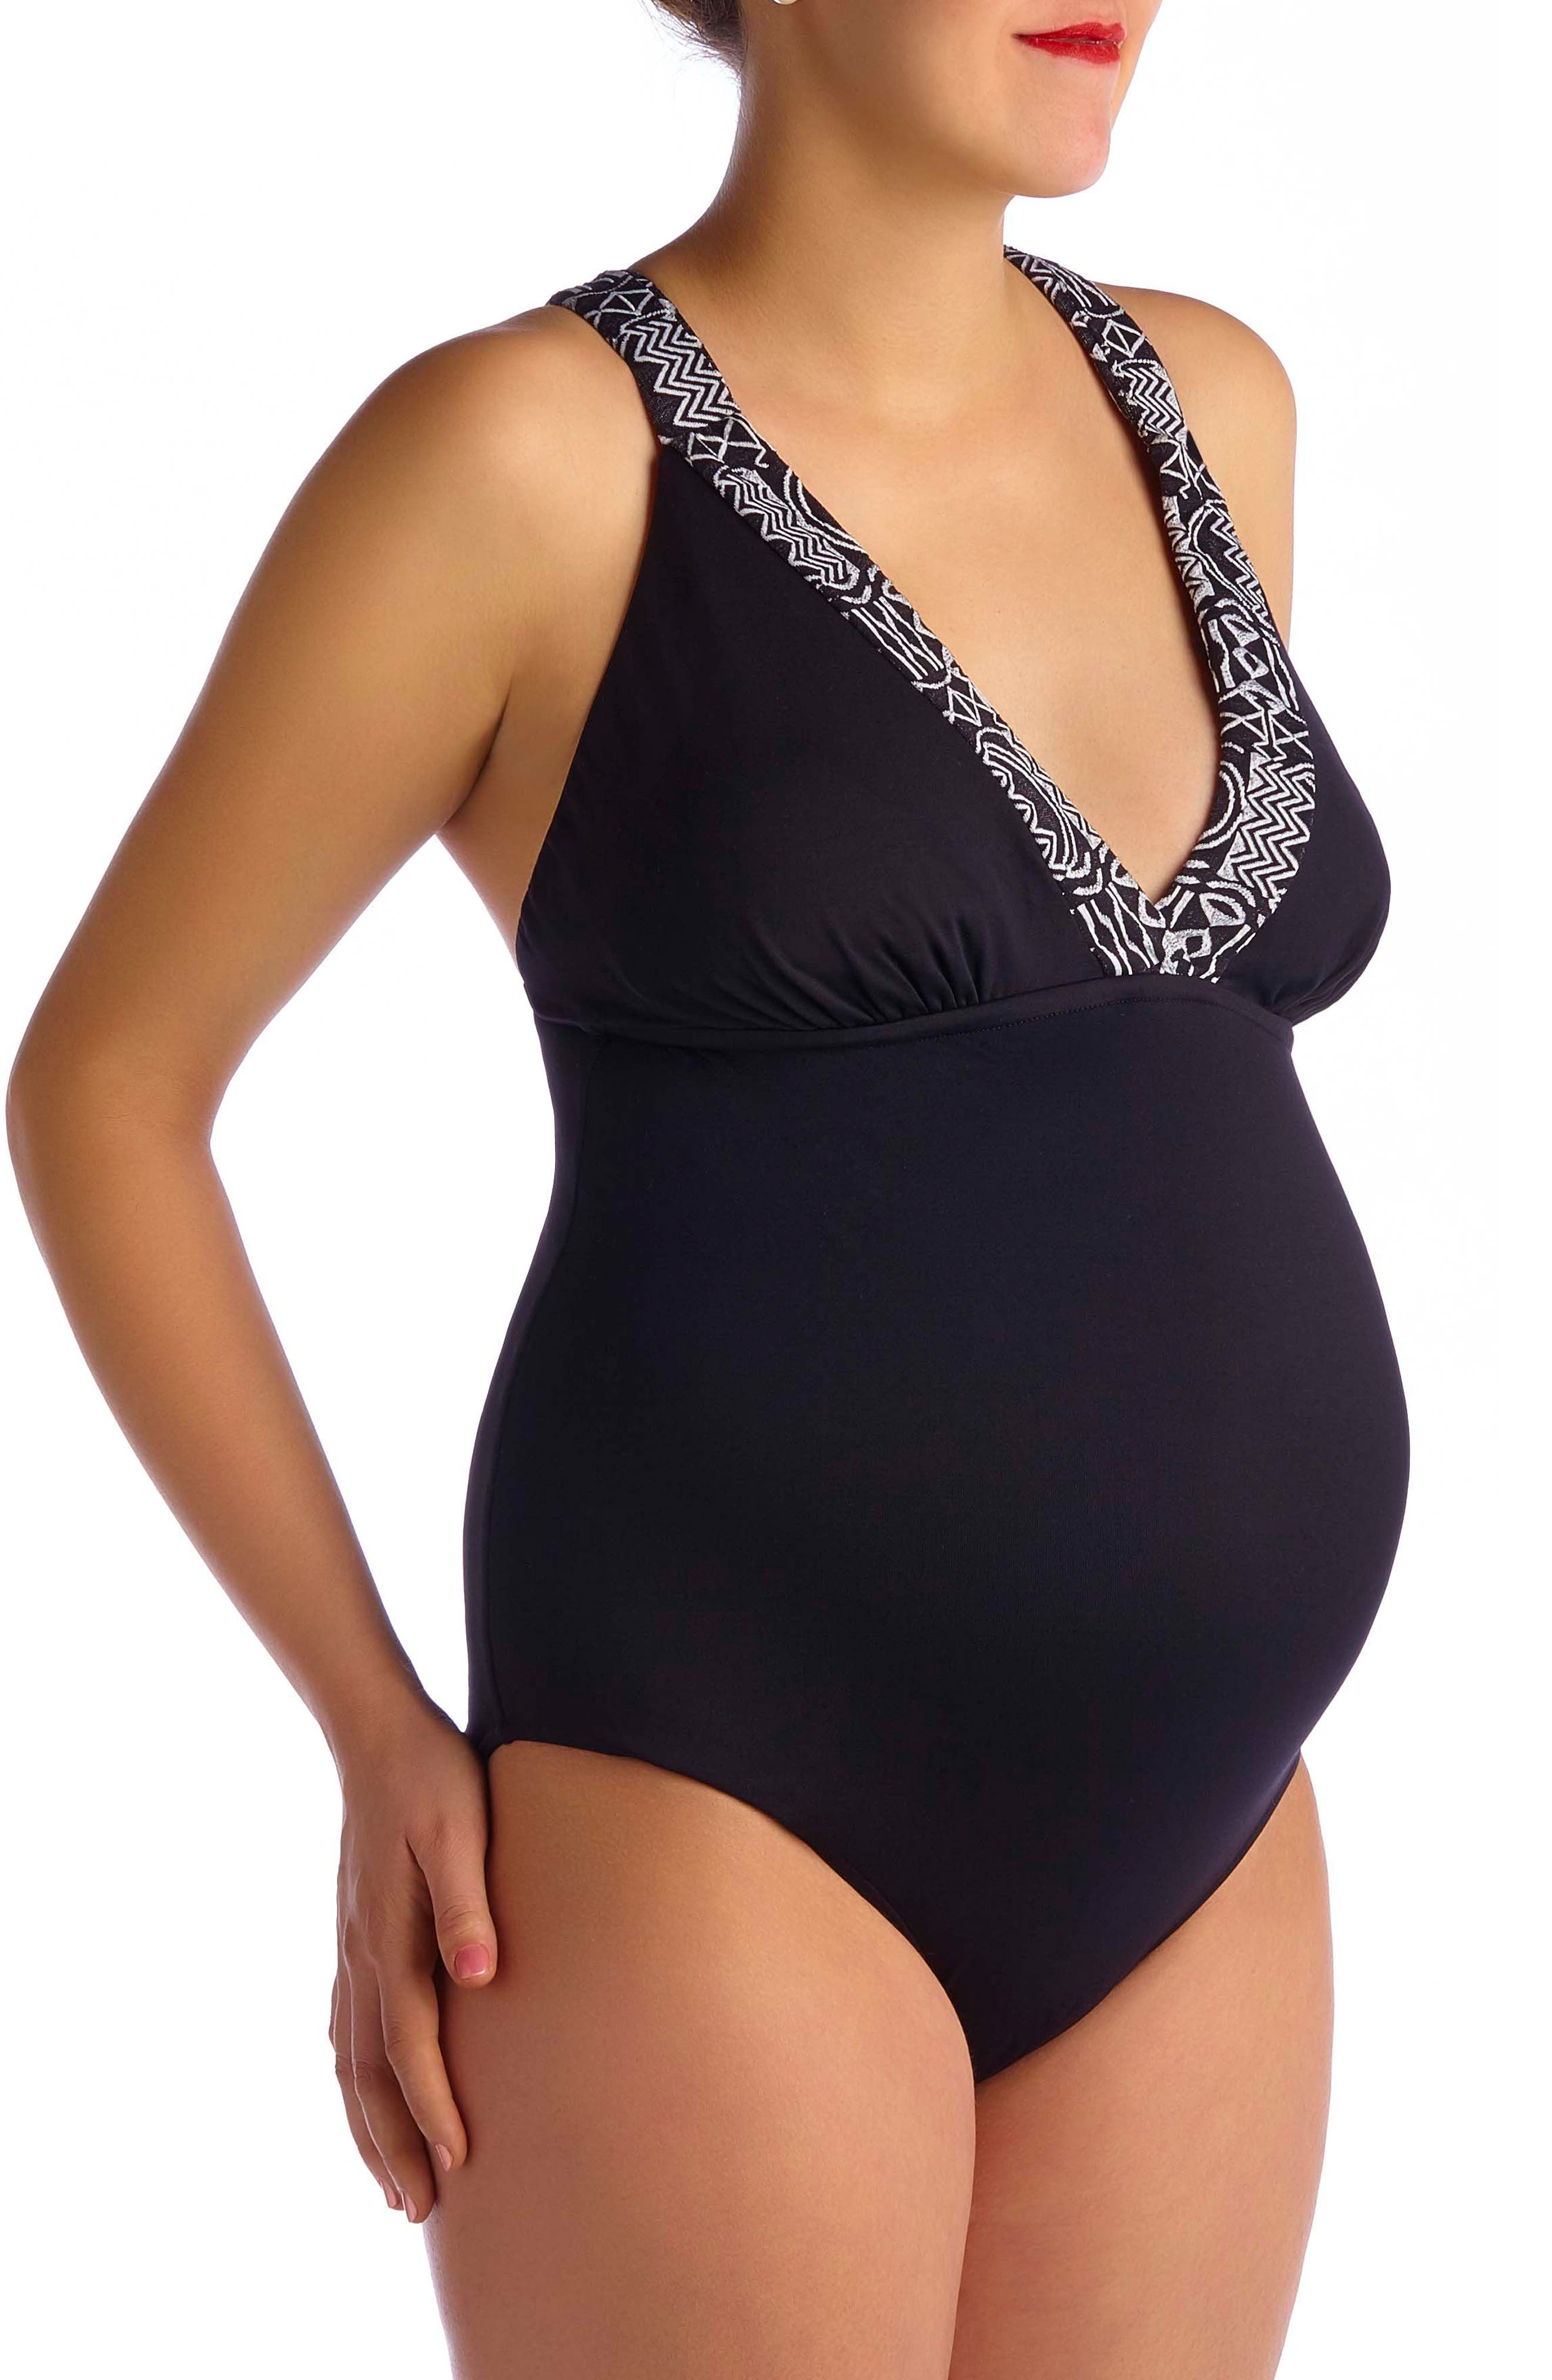 PEZ D'OR MONTEGO BAY MATERNITY ONE-PIECE SWIMSUIT,8430186017226